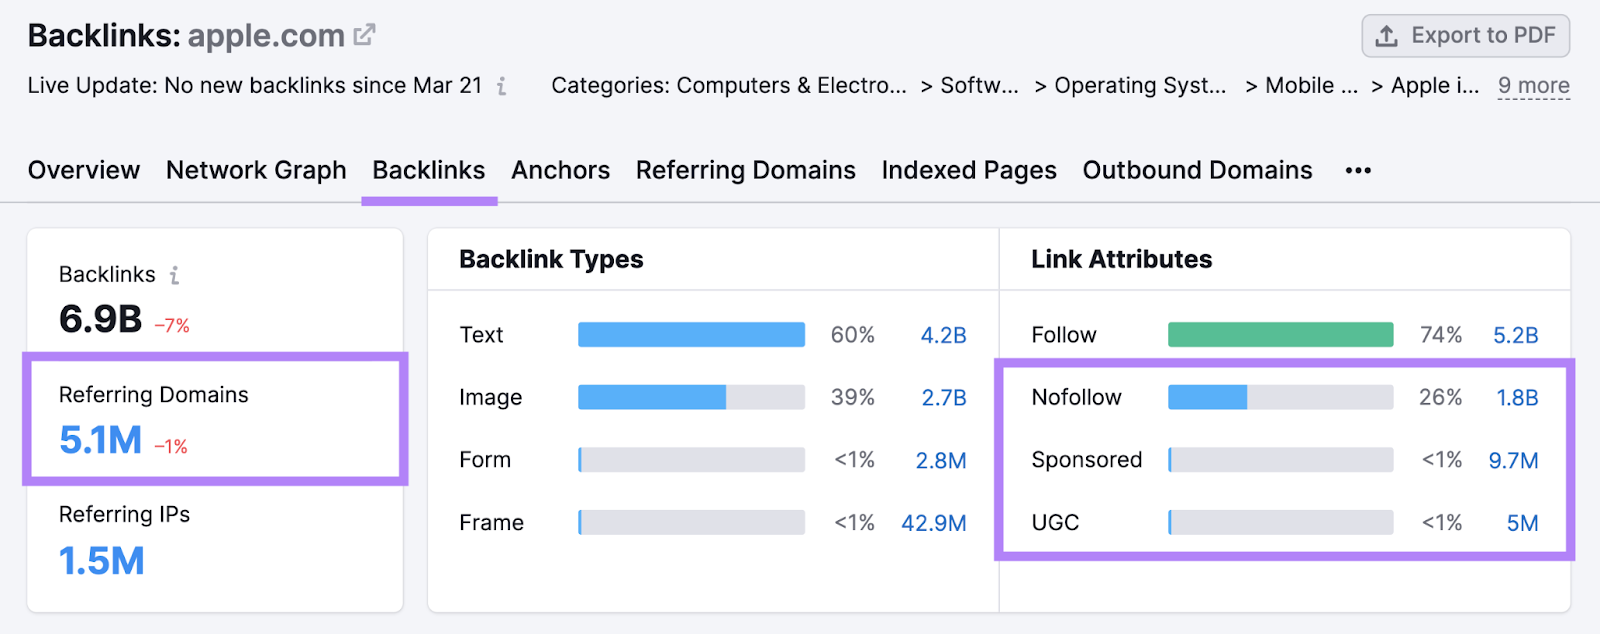 Backlinks report showing 5.1 million referring domains and the number of nofollow, sponsored, and UGC links